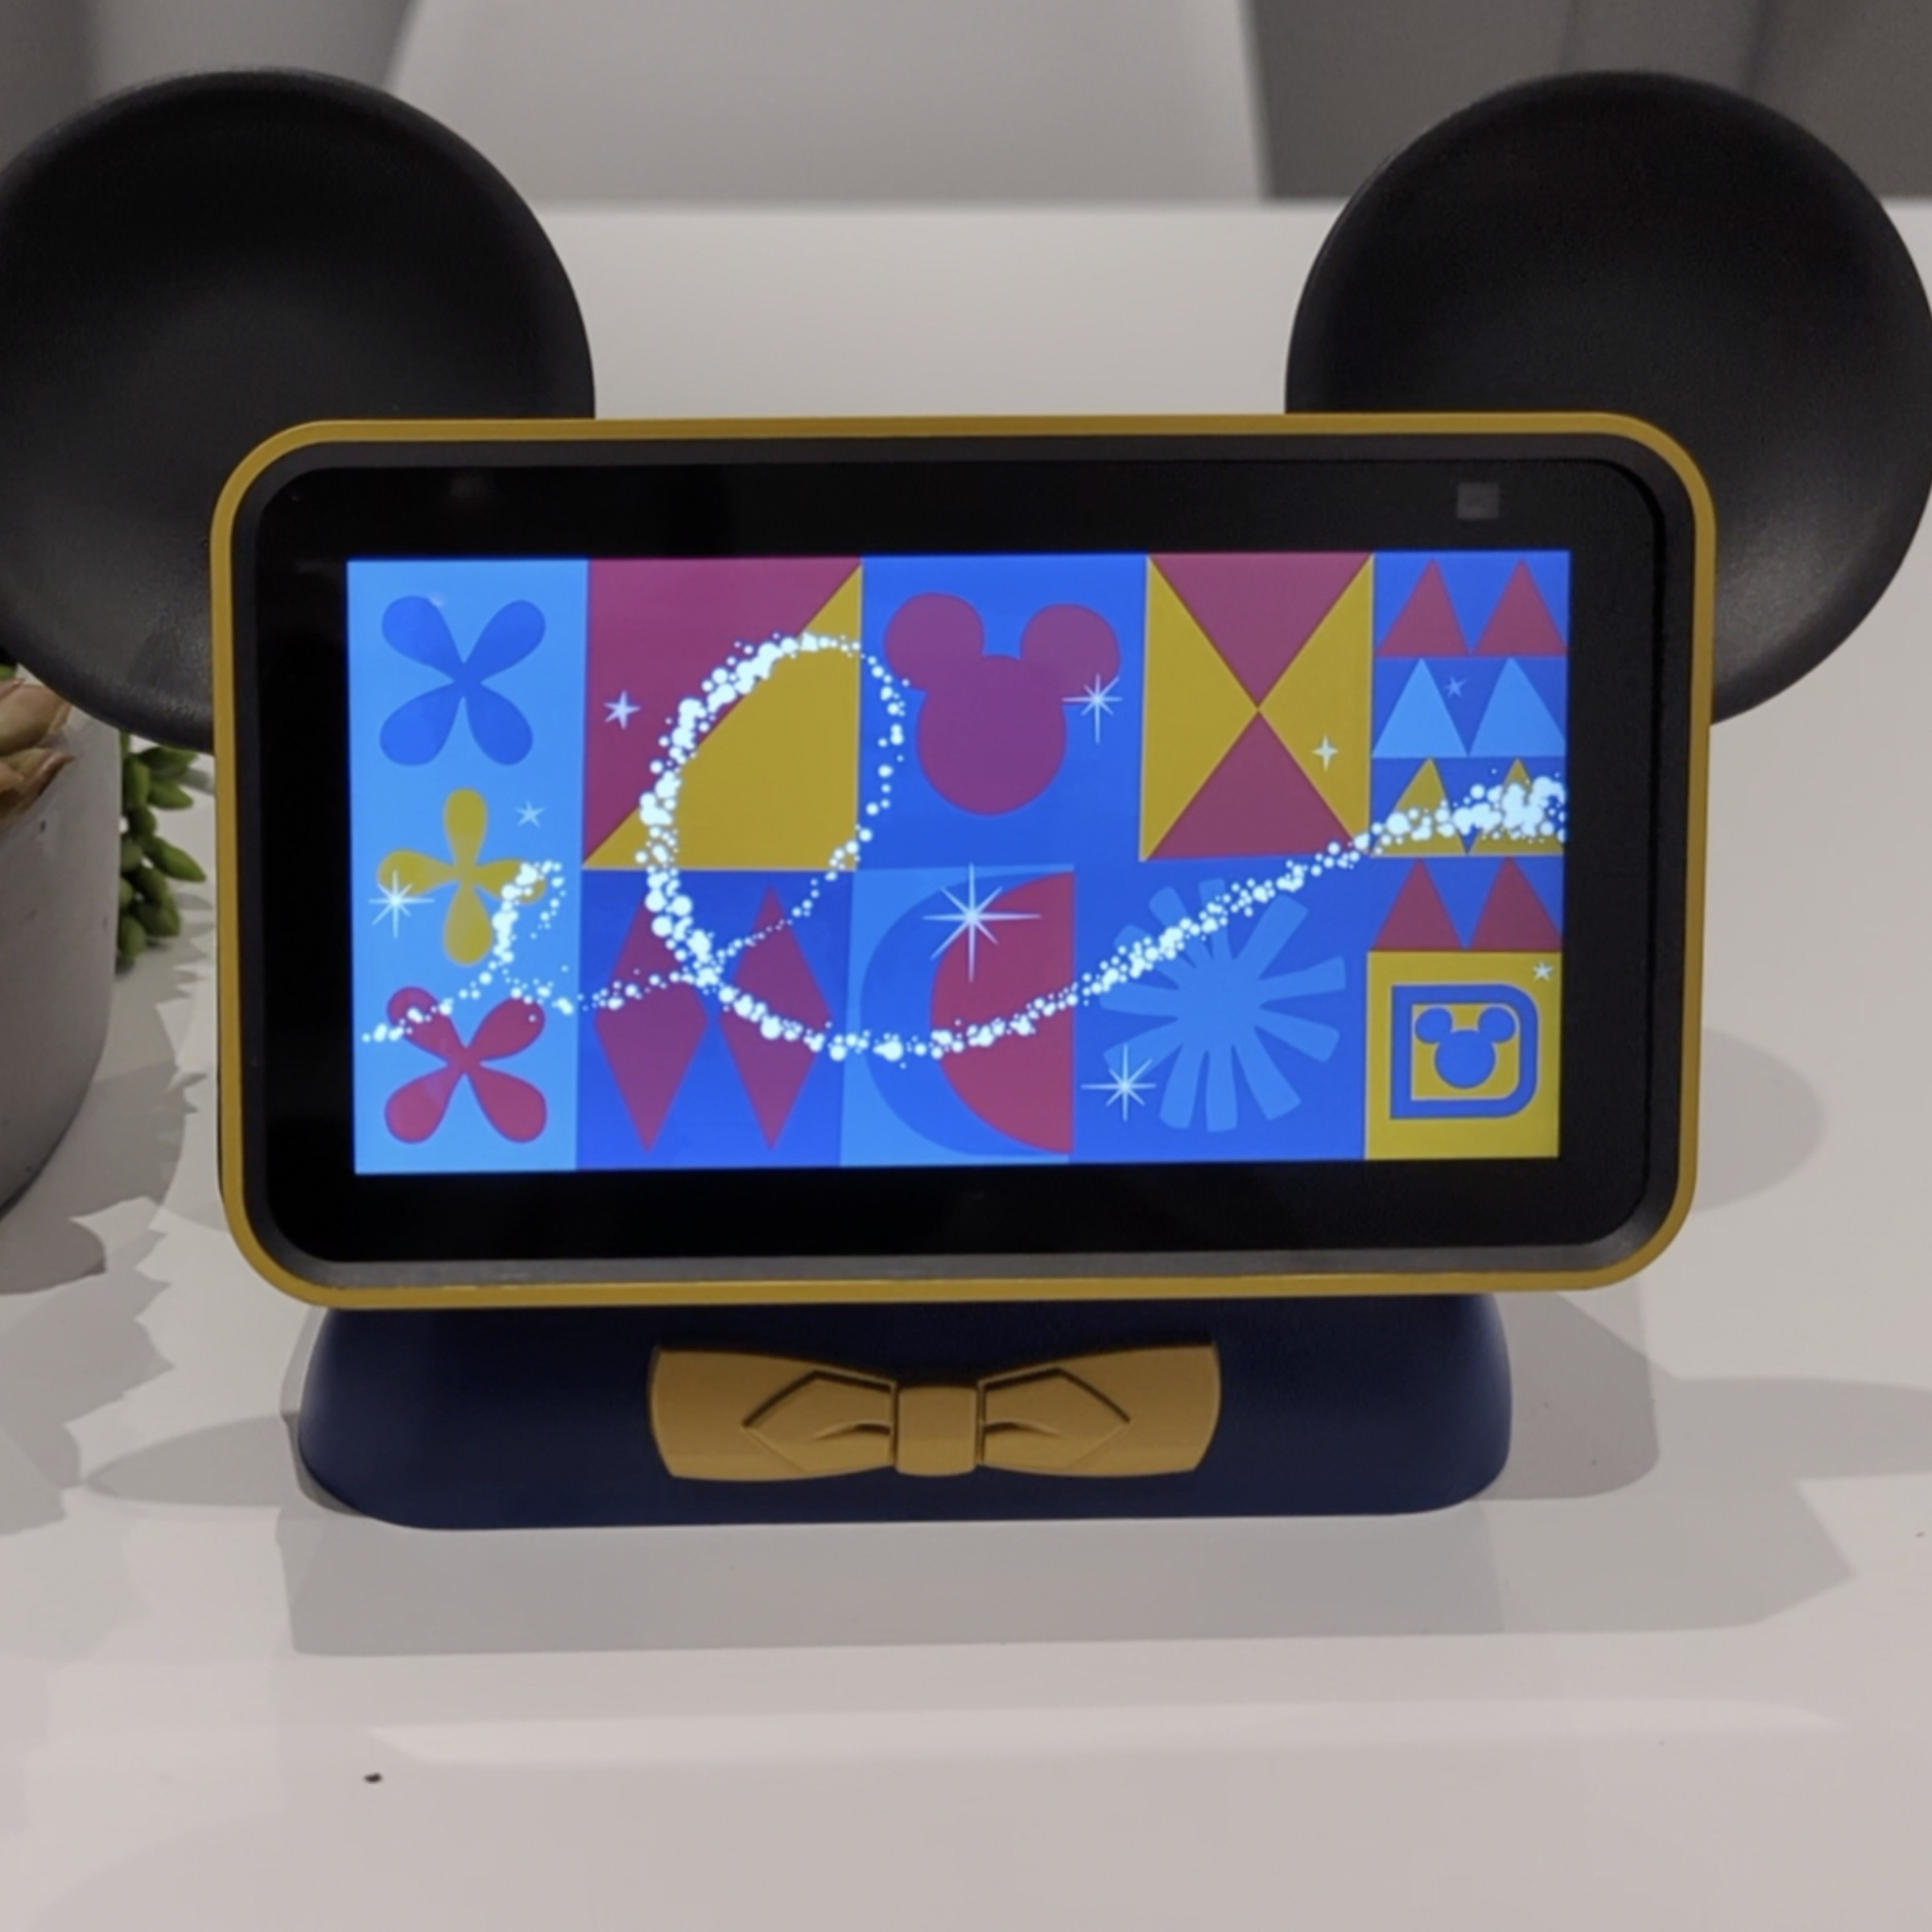 Photo shows a smart display with Mickey Mouse ears sitting on a table, waiting to respond to the “Hey Disney!” command.